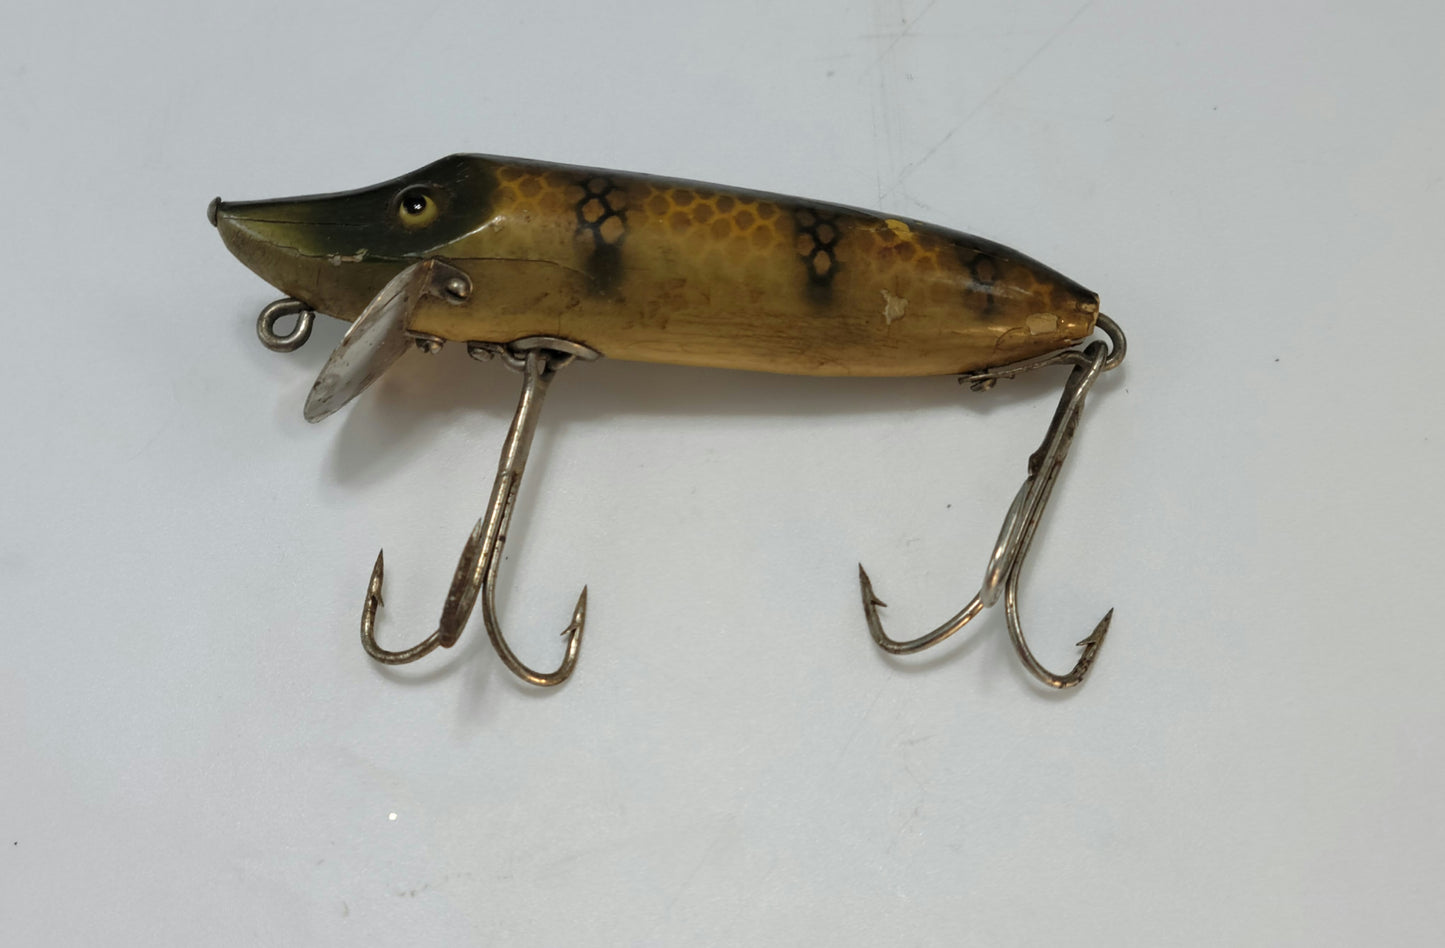 Heddon Fishing lure Dowagiac Minnow with paper and box.1920 to 1927